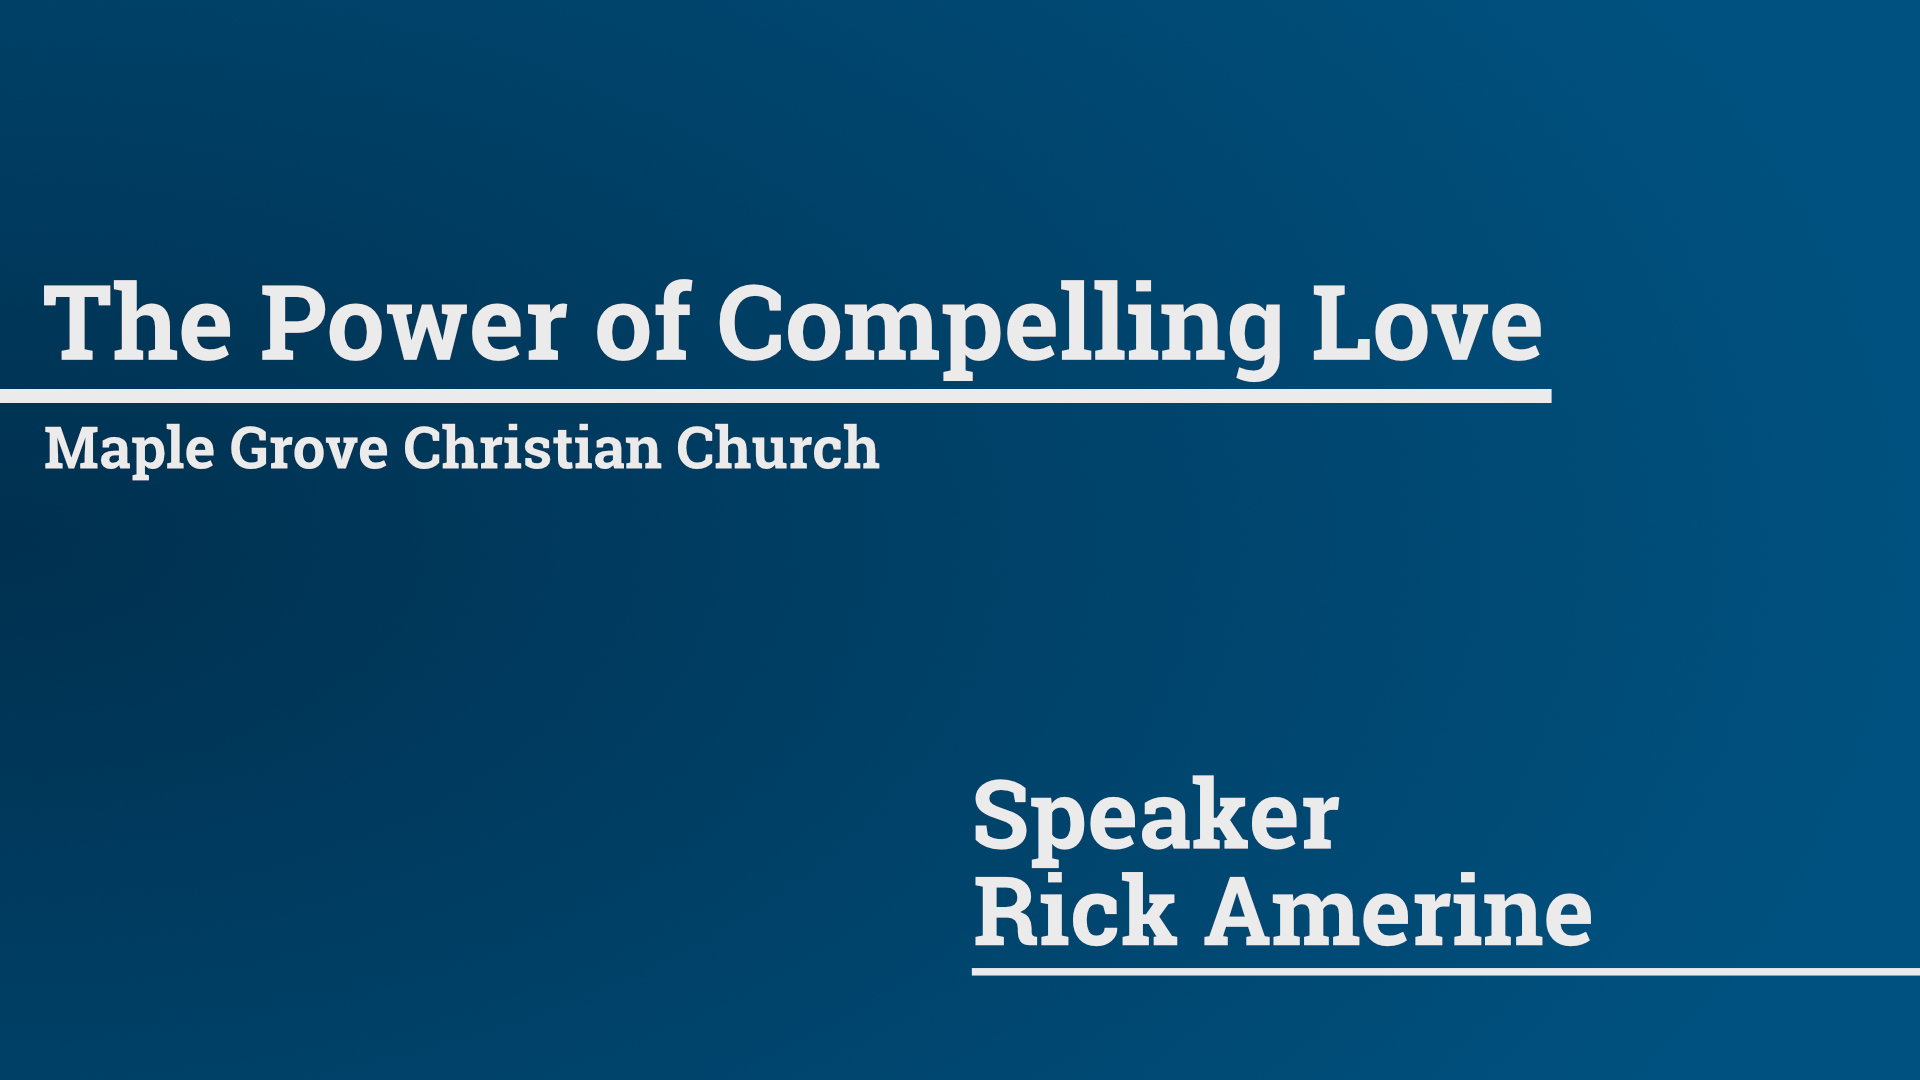 The Power of Compelling Love